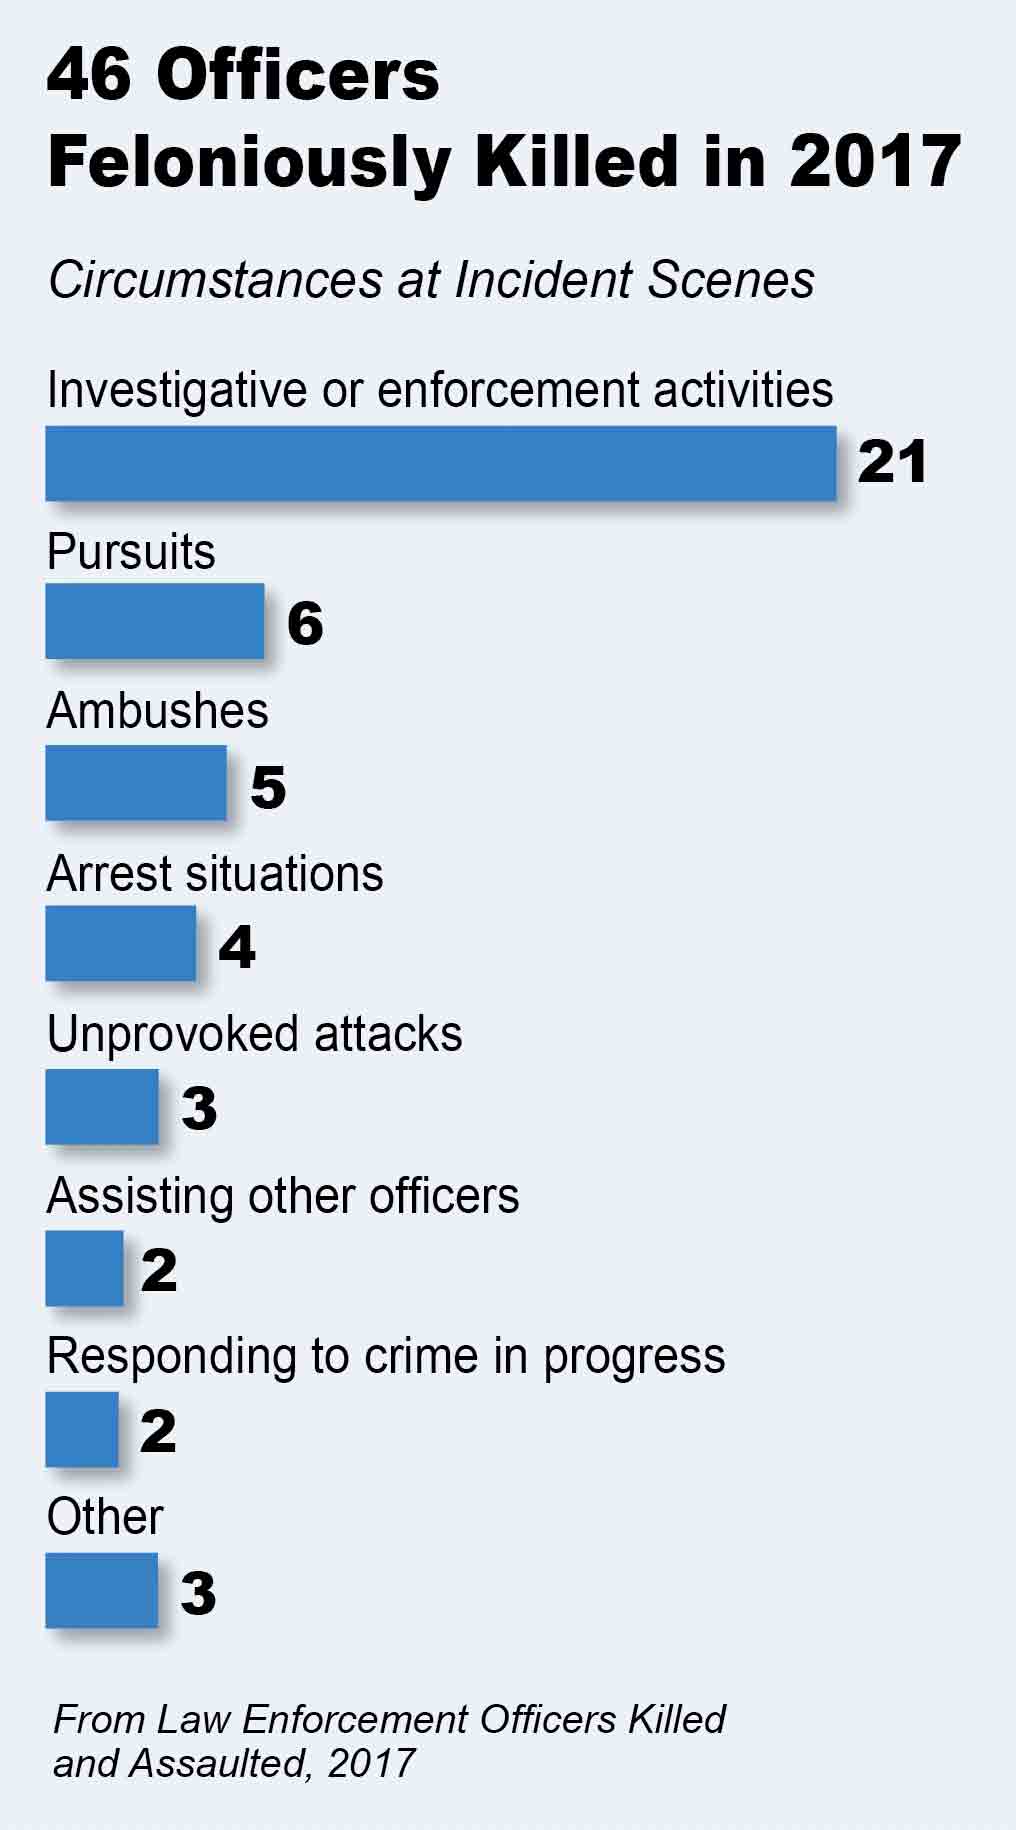 Bar chart depicting the circumstances in which officers were feloniously killed in 2017, according to statistics from the FBI’s Law Enforcement Officers Killed and Assaulted, 2017 report.